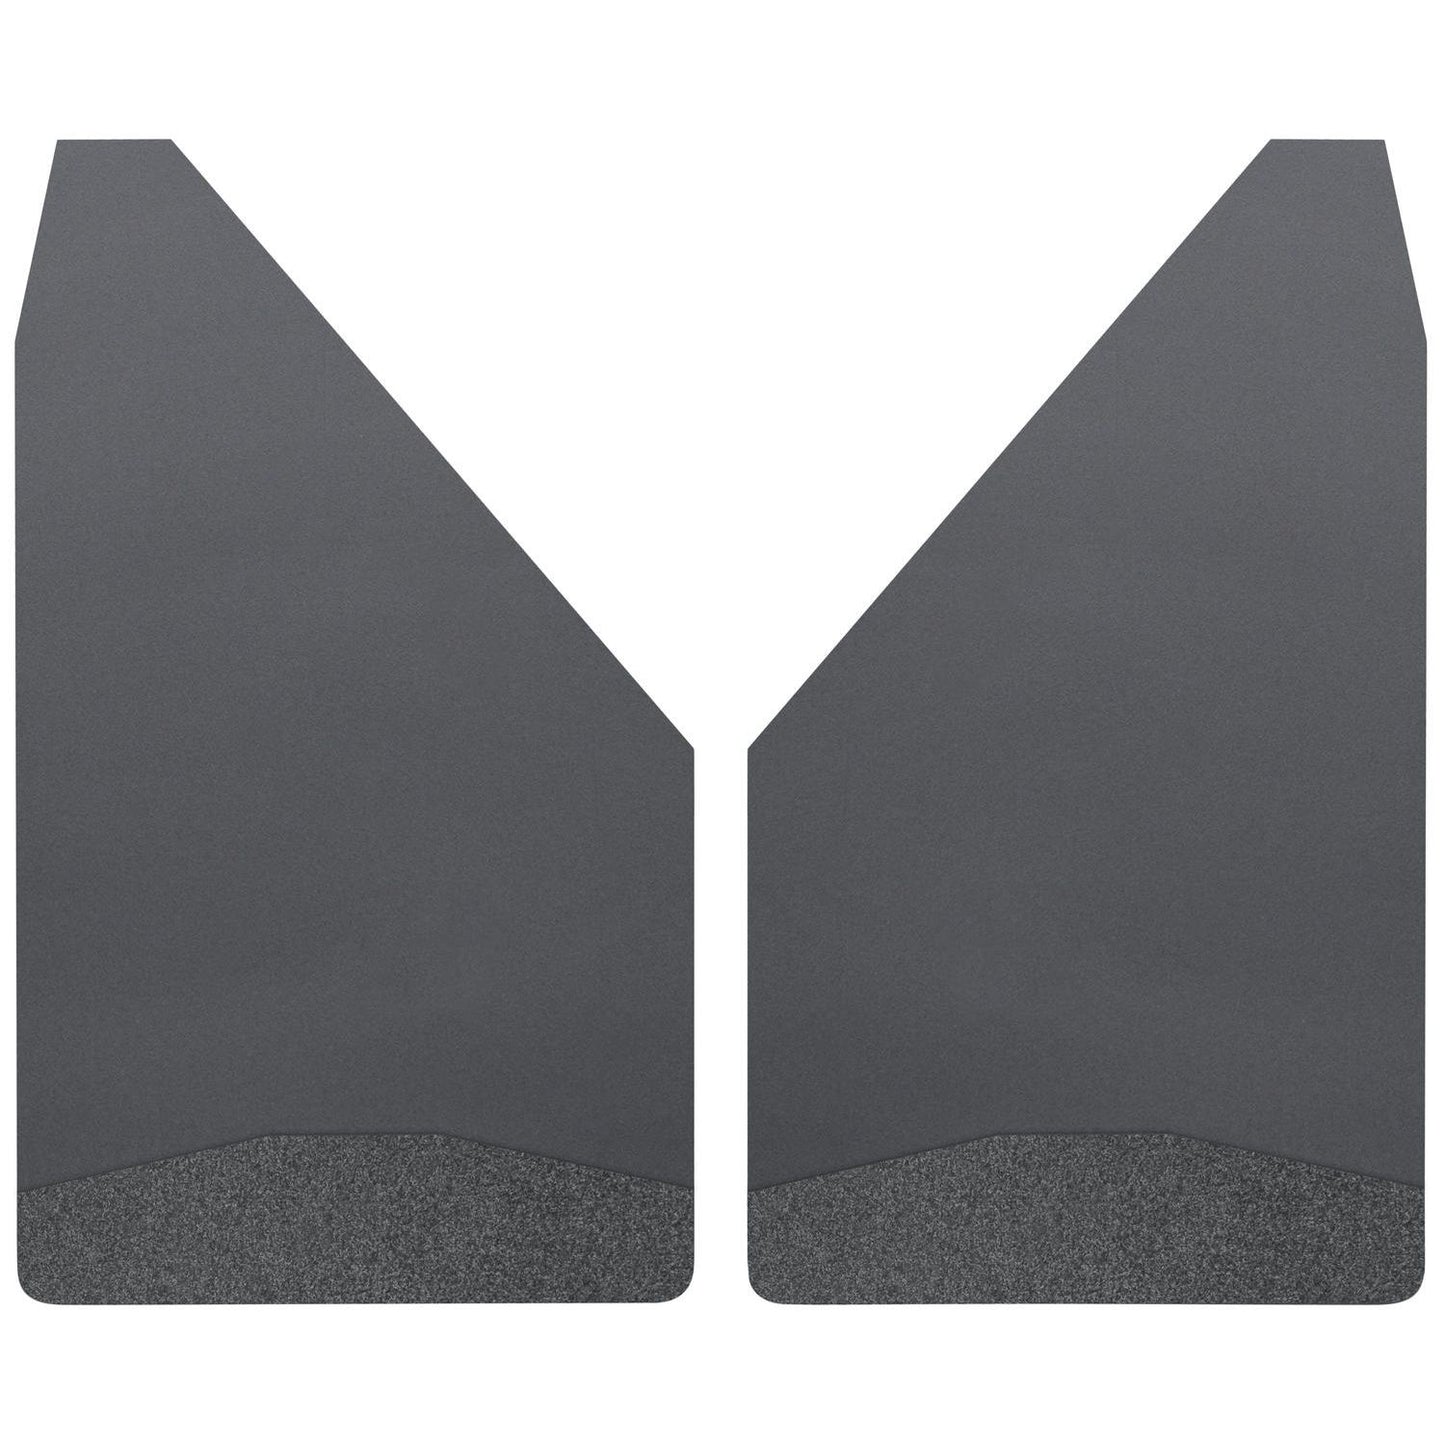 Husky Liners Universal Mud Flaps 14" Wide - Black Weight 17153